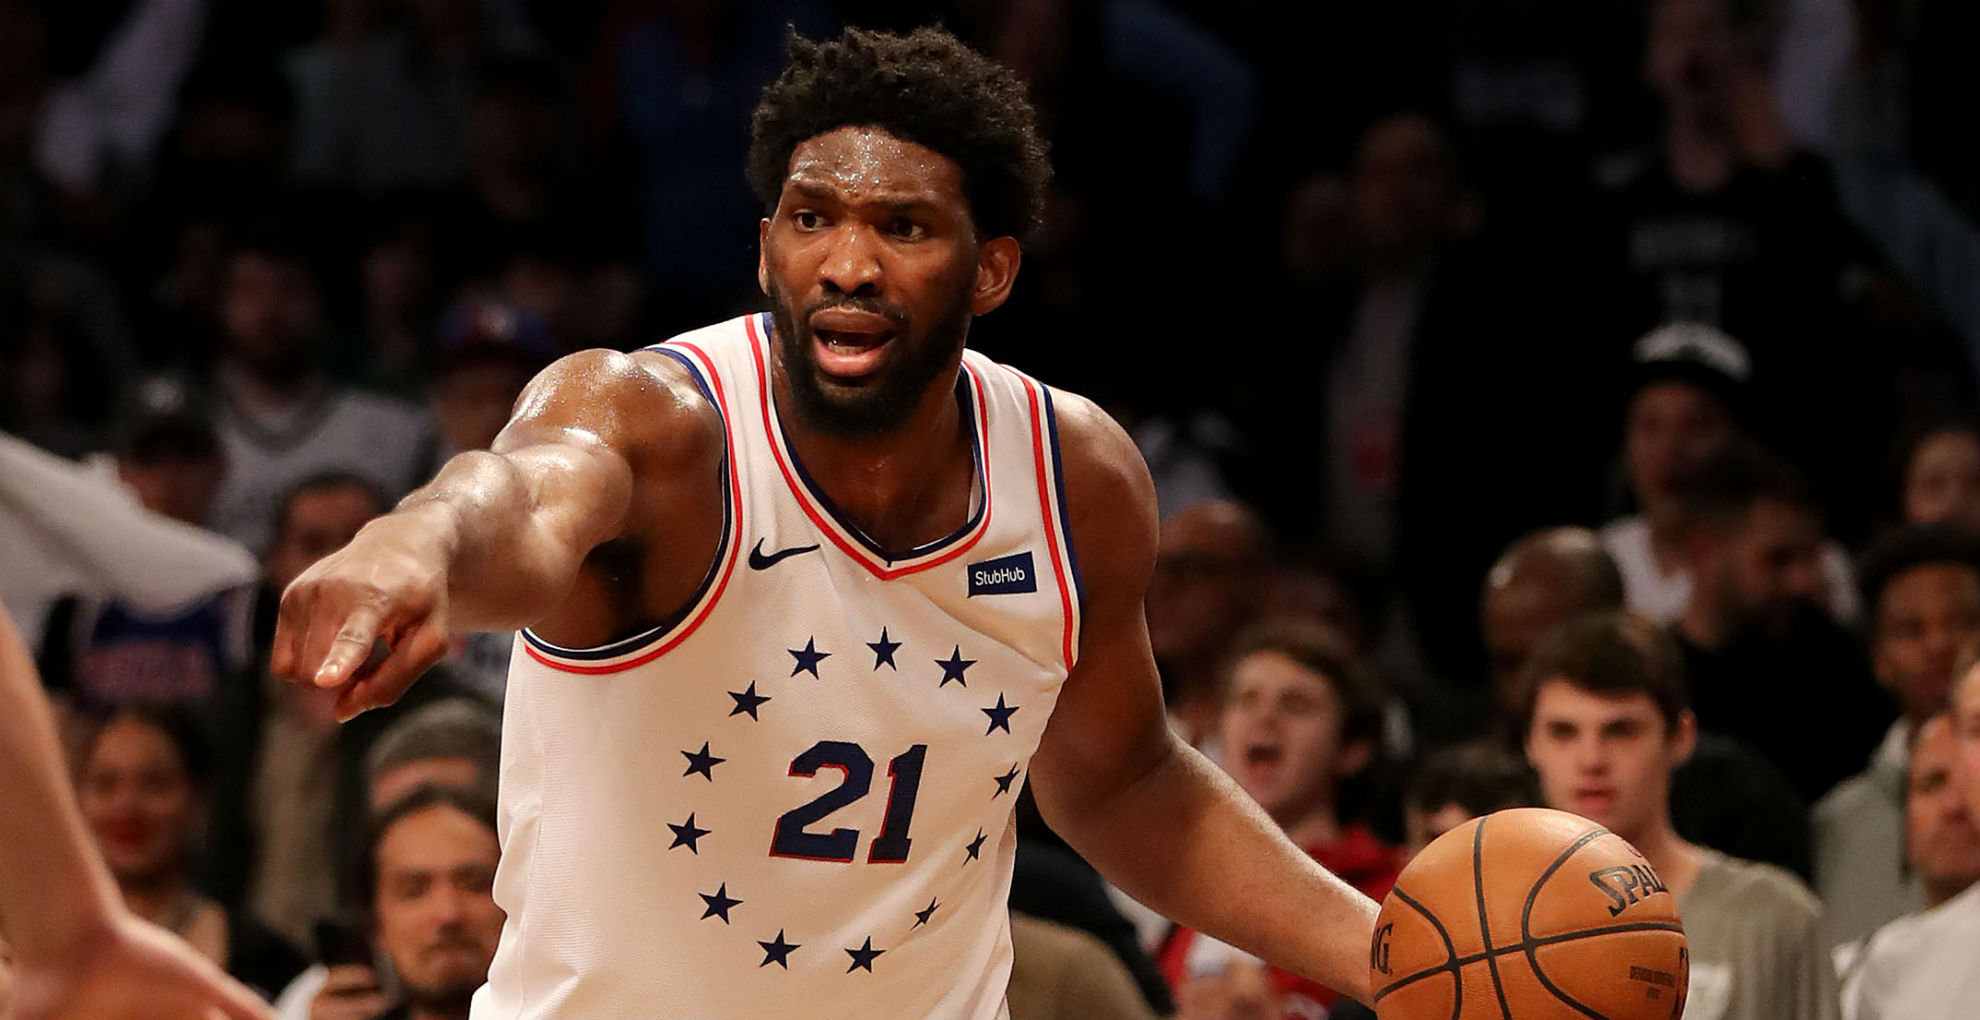 Joel Embiid was in a joking mood after the Philadelphia 76ers defeated the Brooklyn Nets in Game 4 of their NBA playoff series.